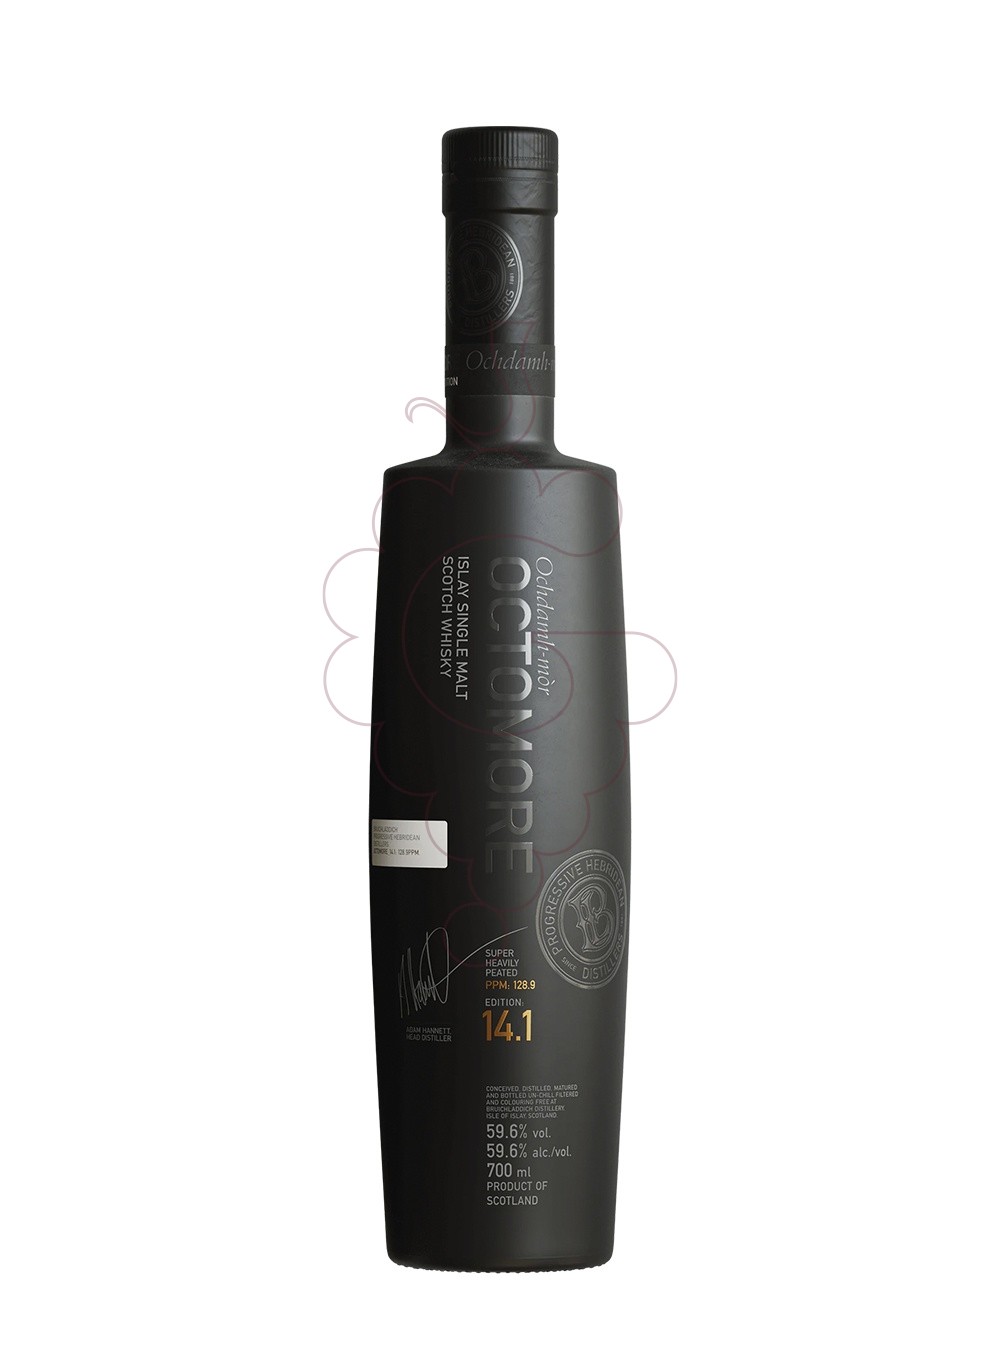 Photo Whisky Octomore 14.1 70 cl